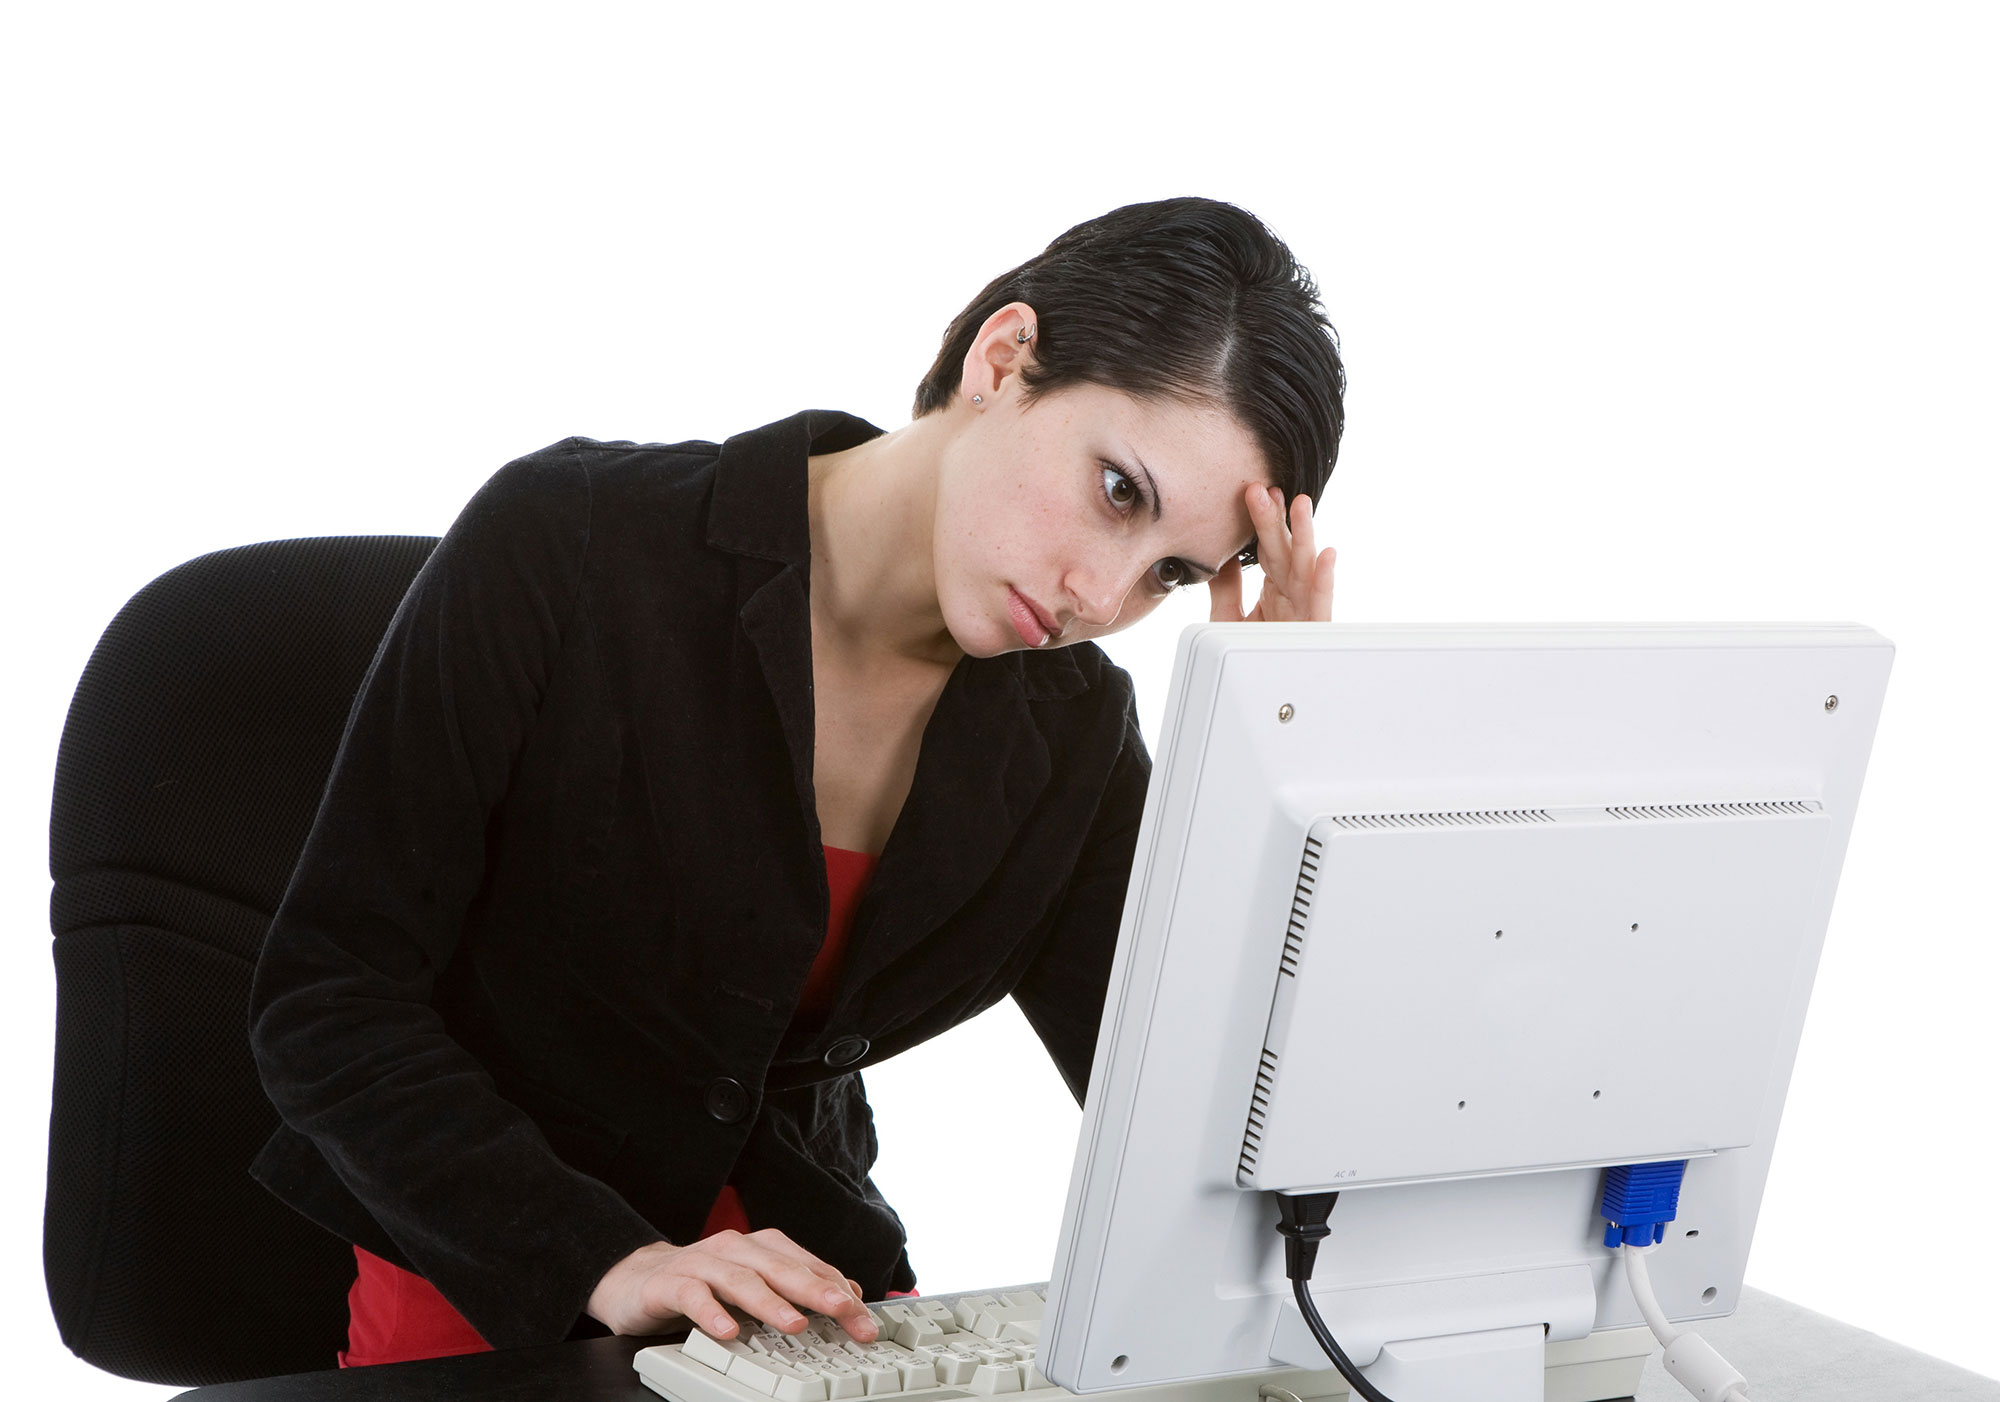 Upset lady in front of a computer